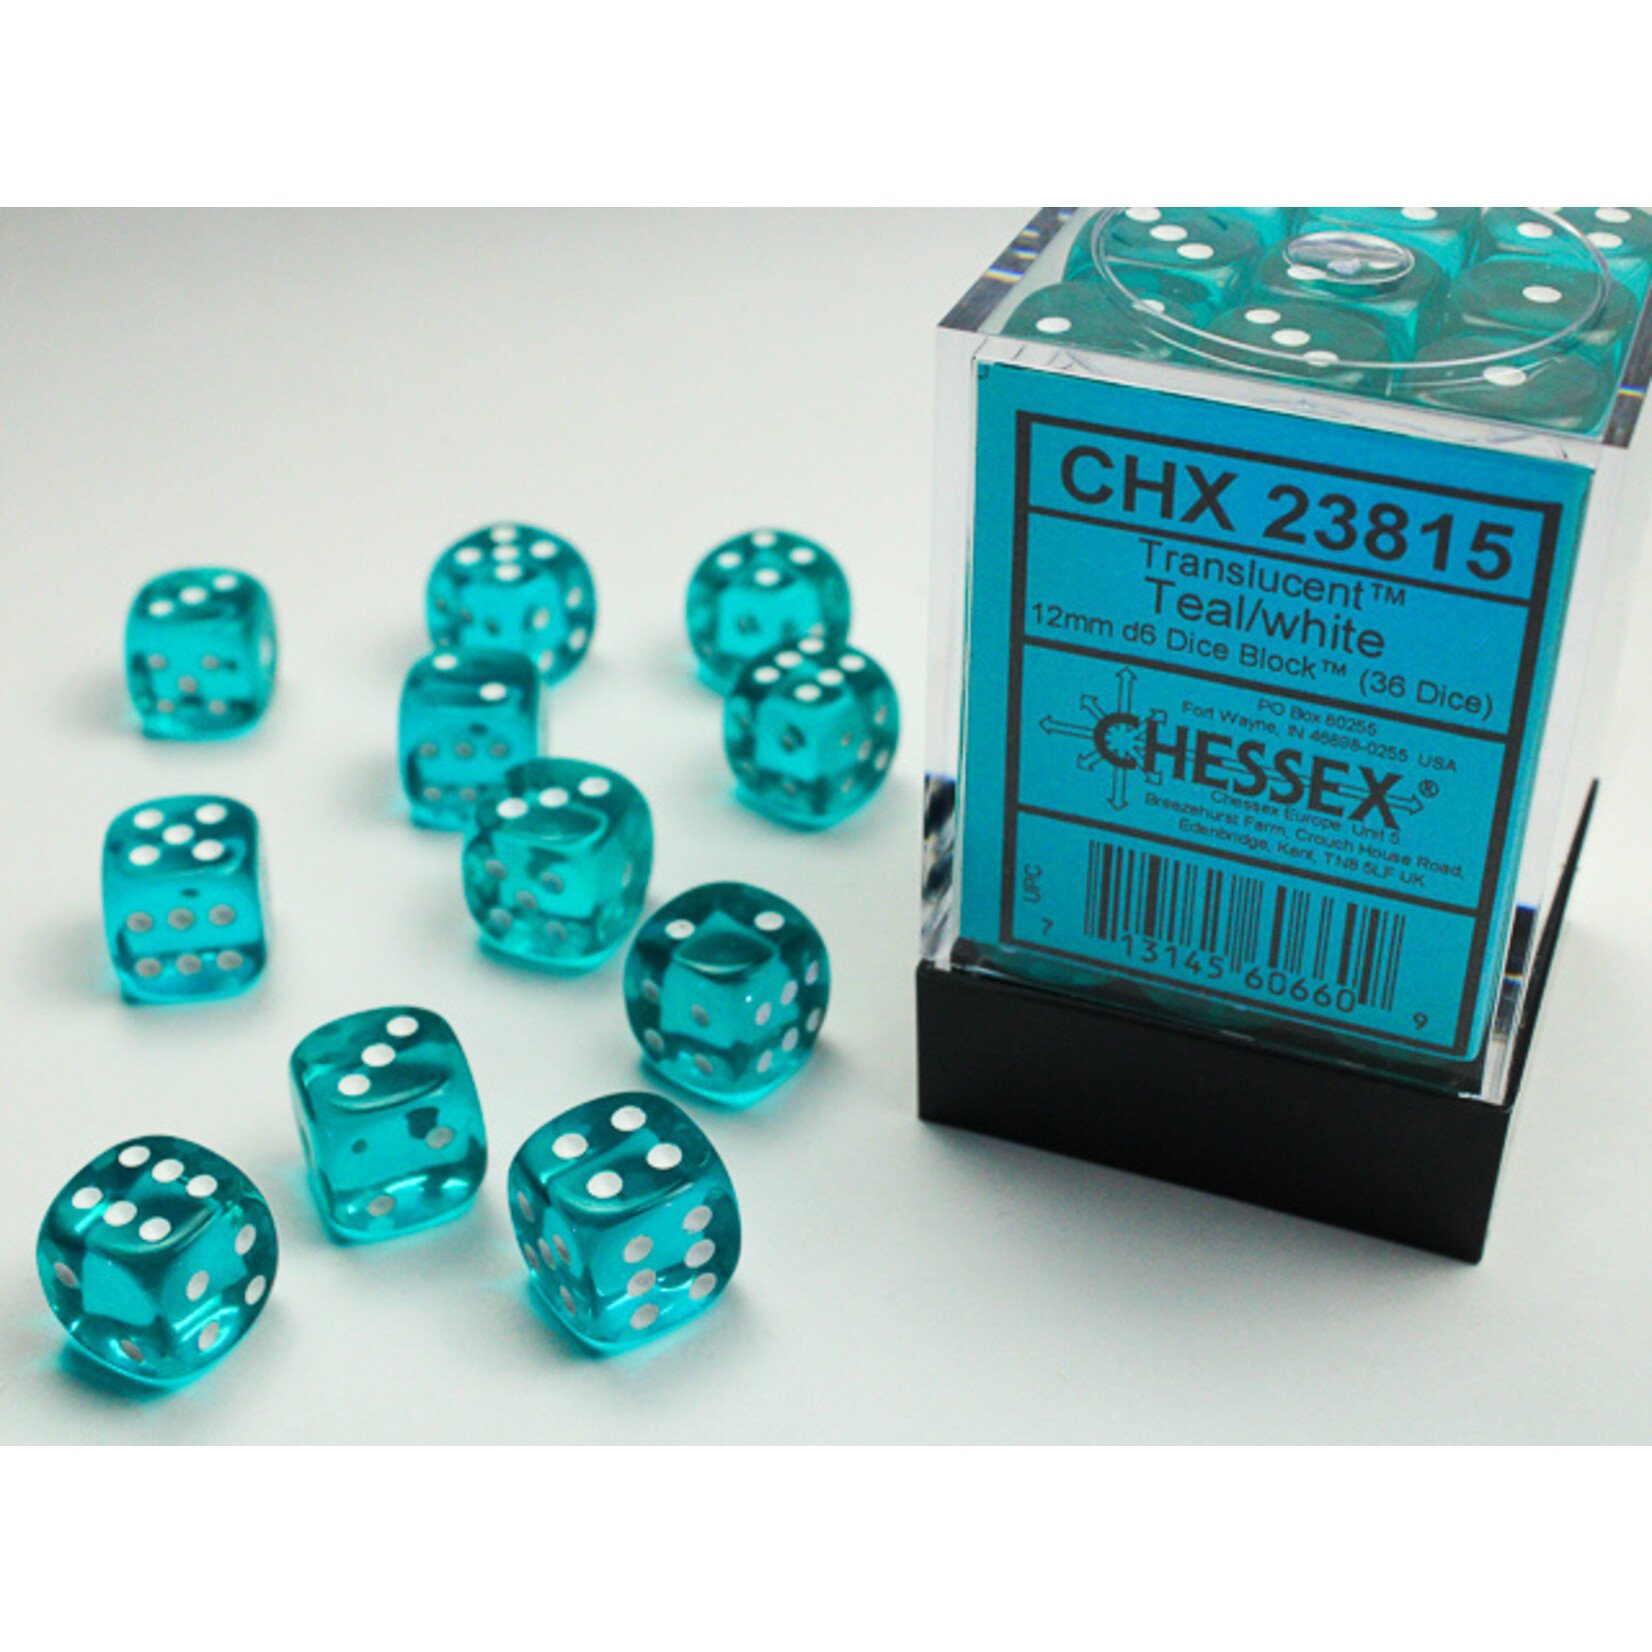 Chessex Chessex 36 x D6 Set Translucent 12mm - Teal/White